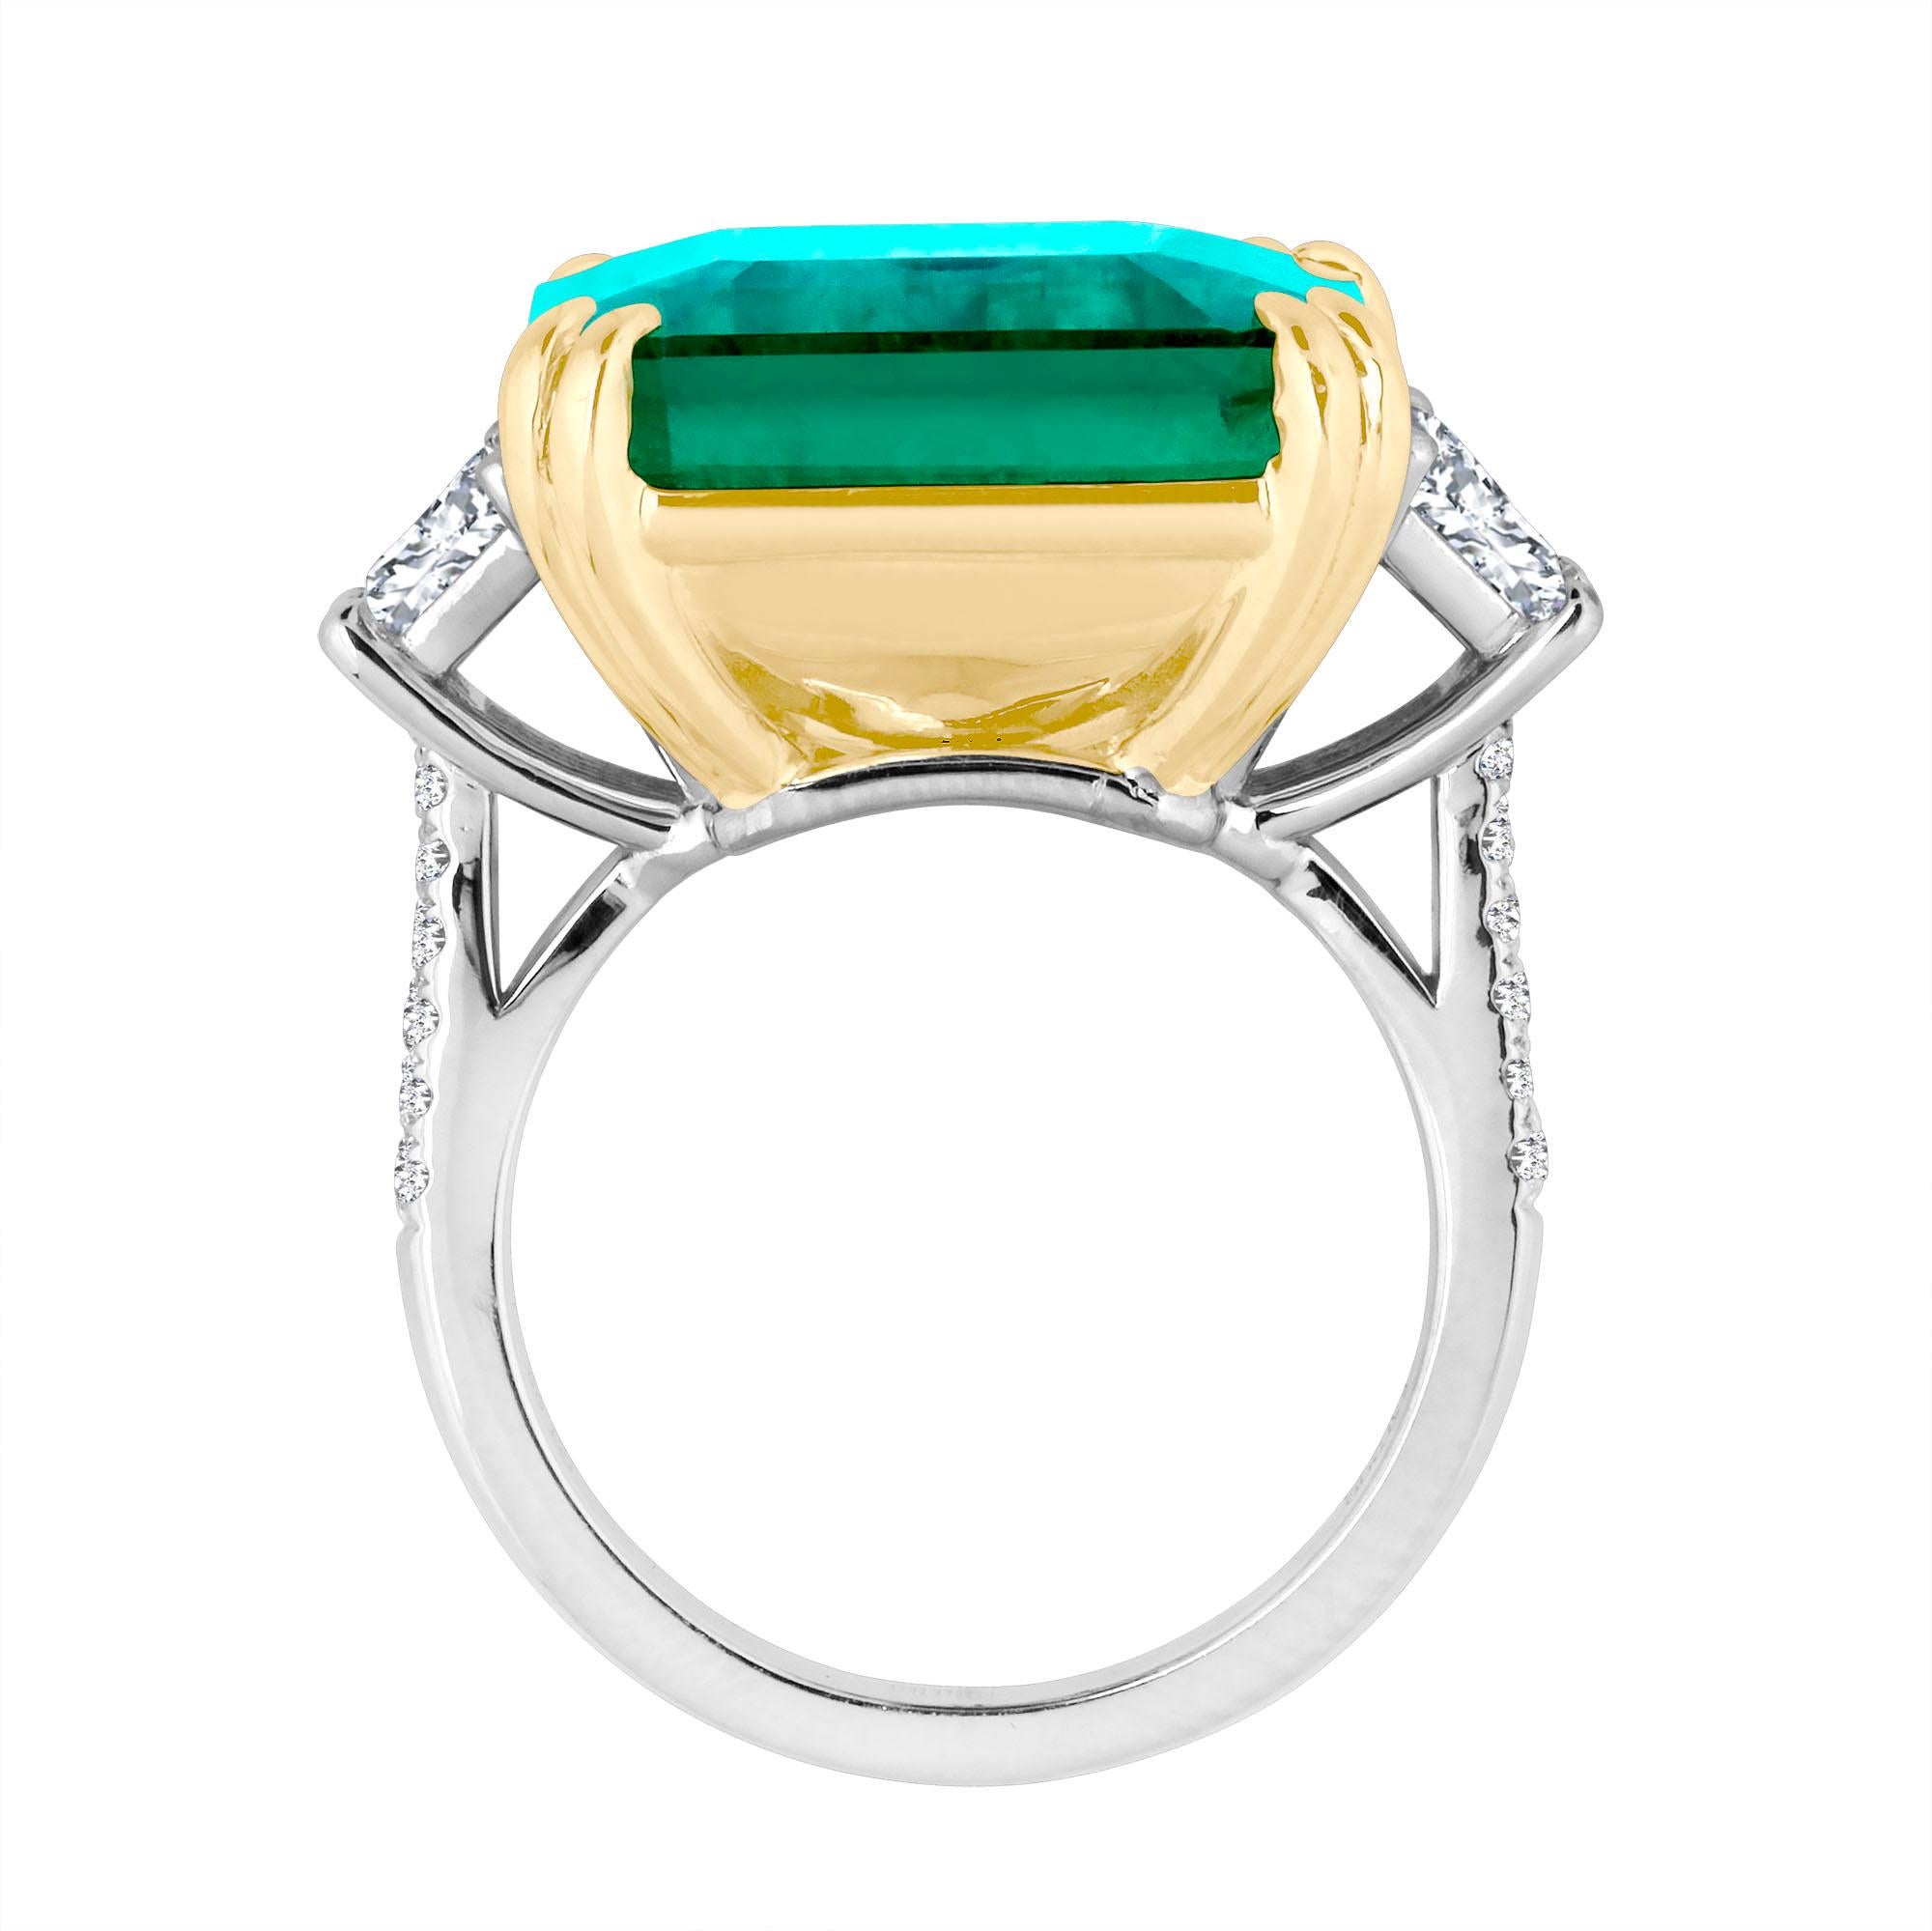 Hand made in the Emilio Jewelry Factory, A gorgeous bright green Genuine Emerald Cut Certified Columbian Emerald 21.11 Carats set in the center. The emerald is extremely clean and completely eye clean. The emerald cutting is exceptional. The color